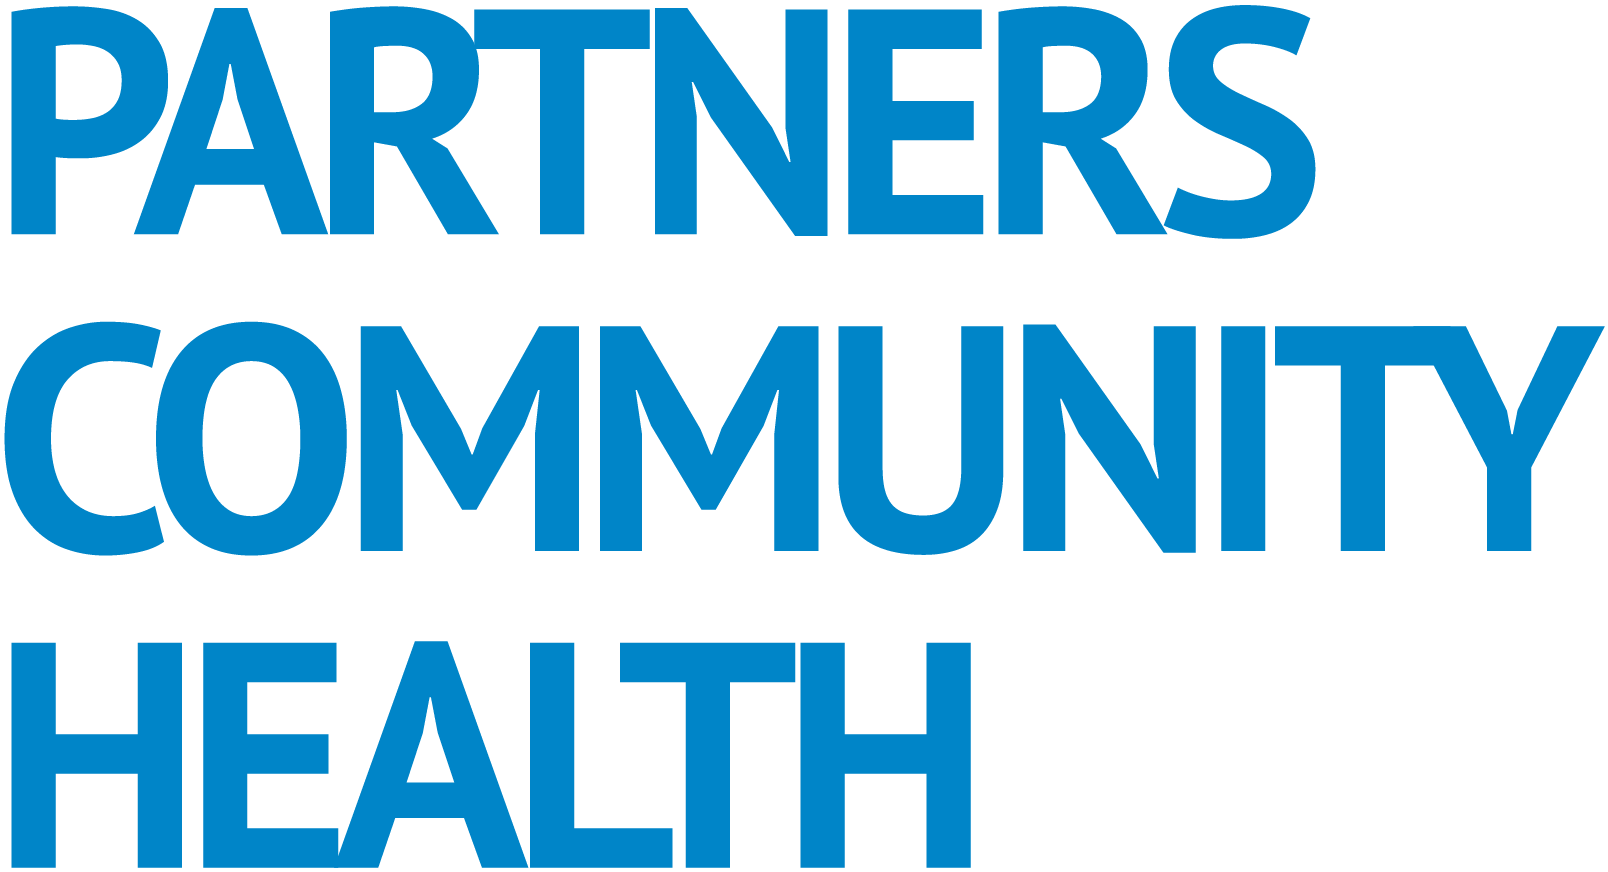 Partners Community Health main logo in the branded blue